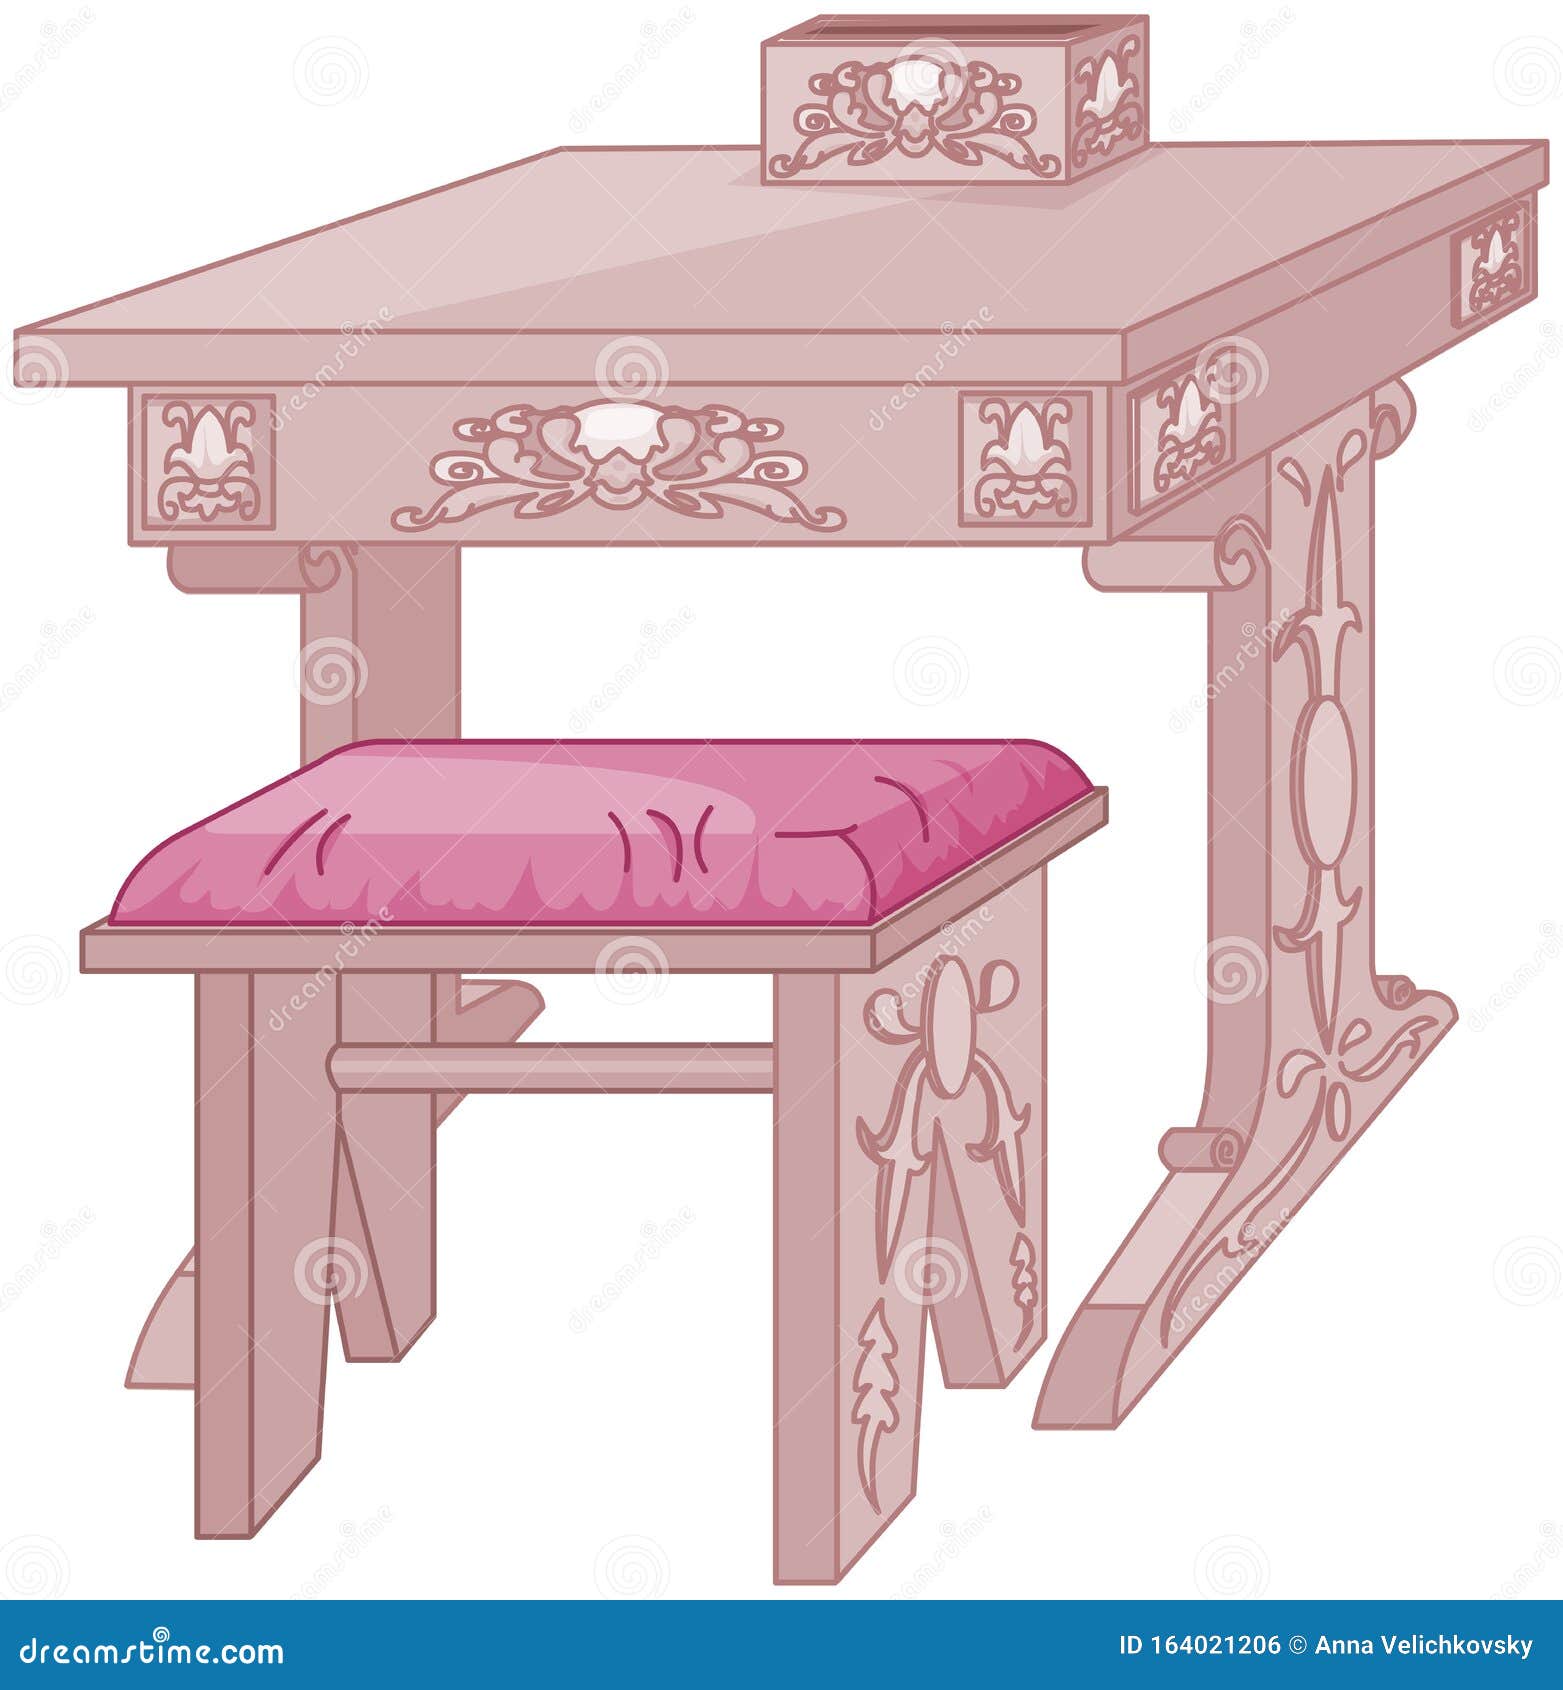 Princess Student Desk And Chair Stock Vector Illustration Of